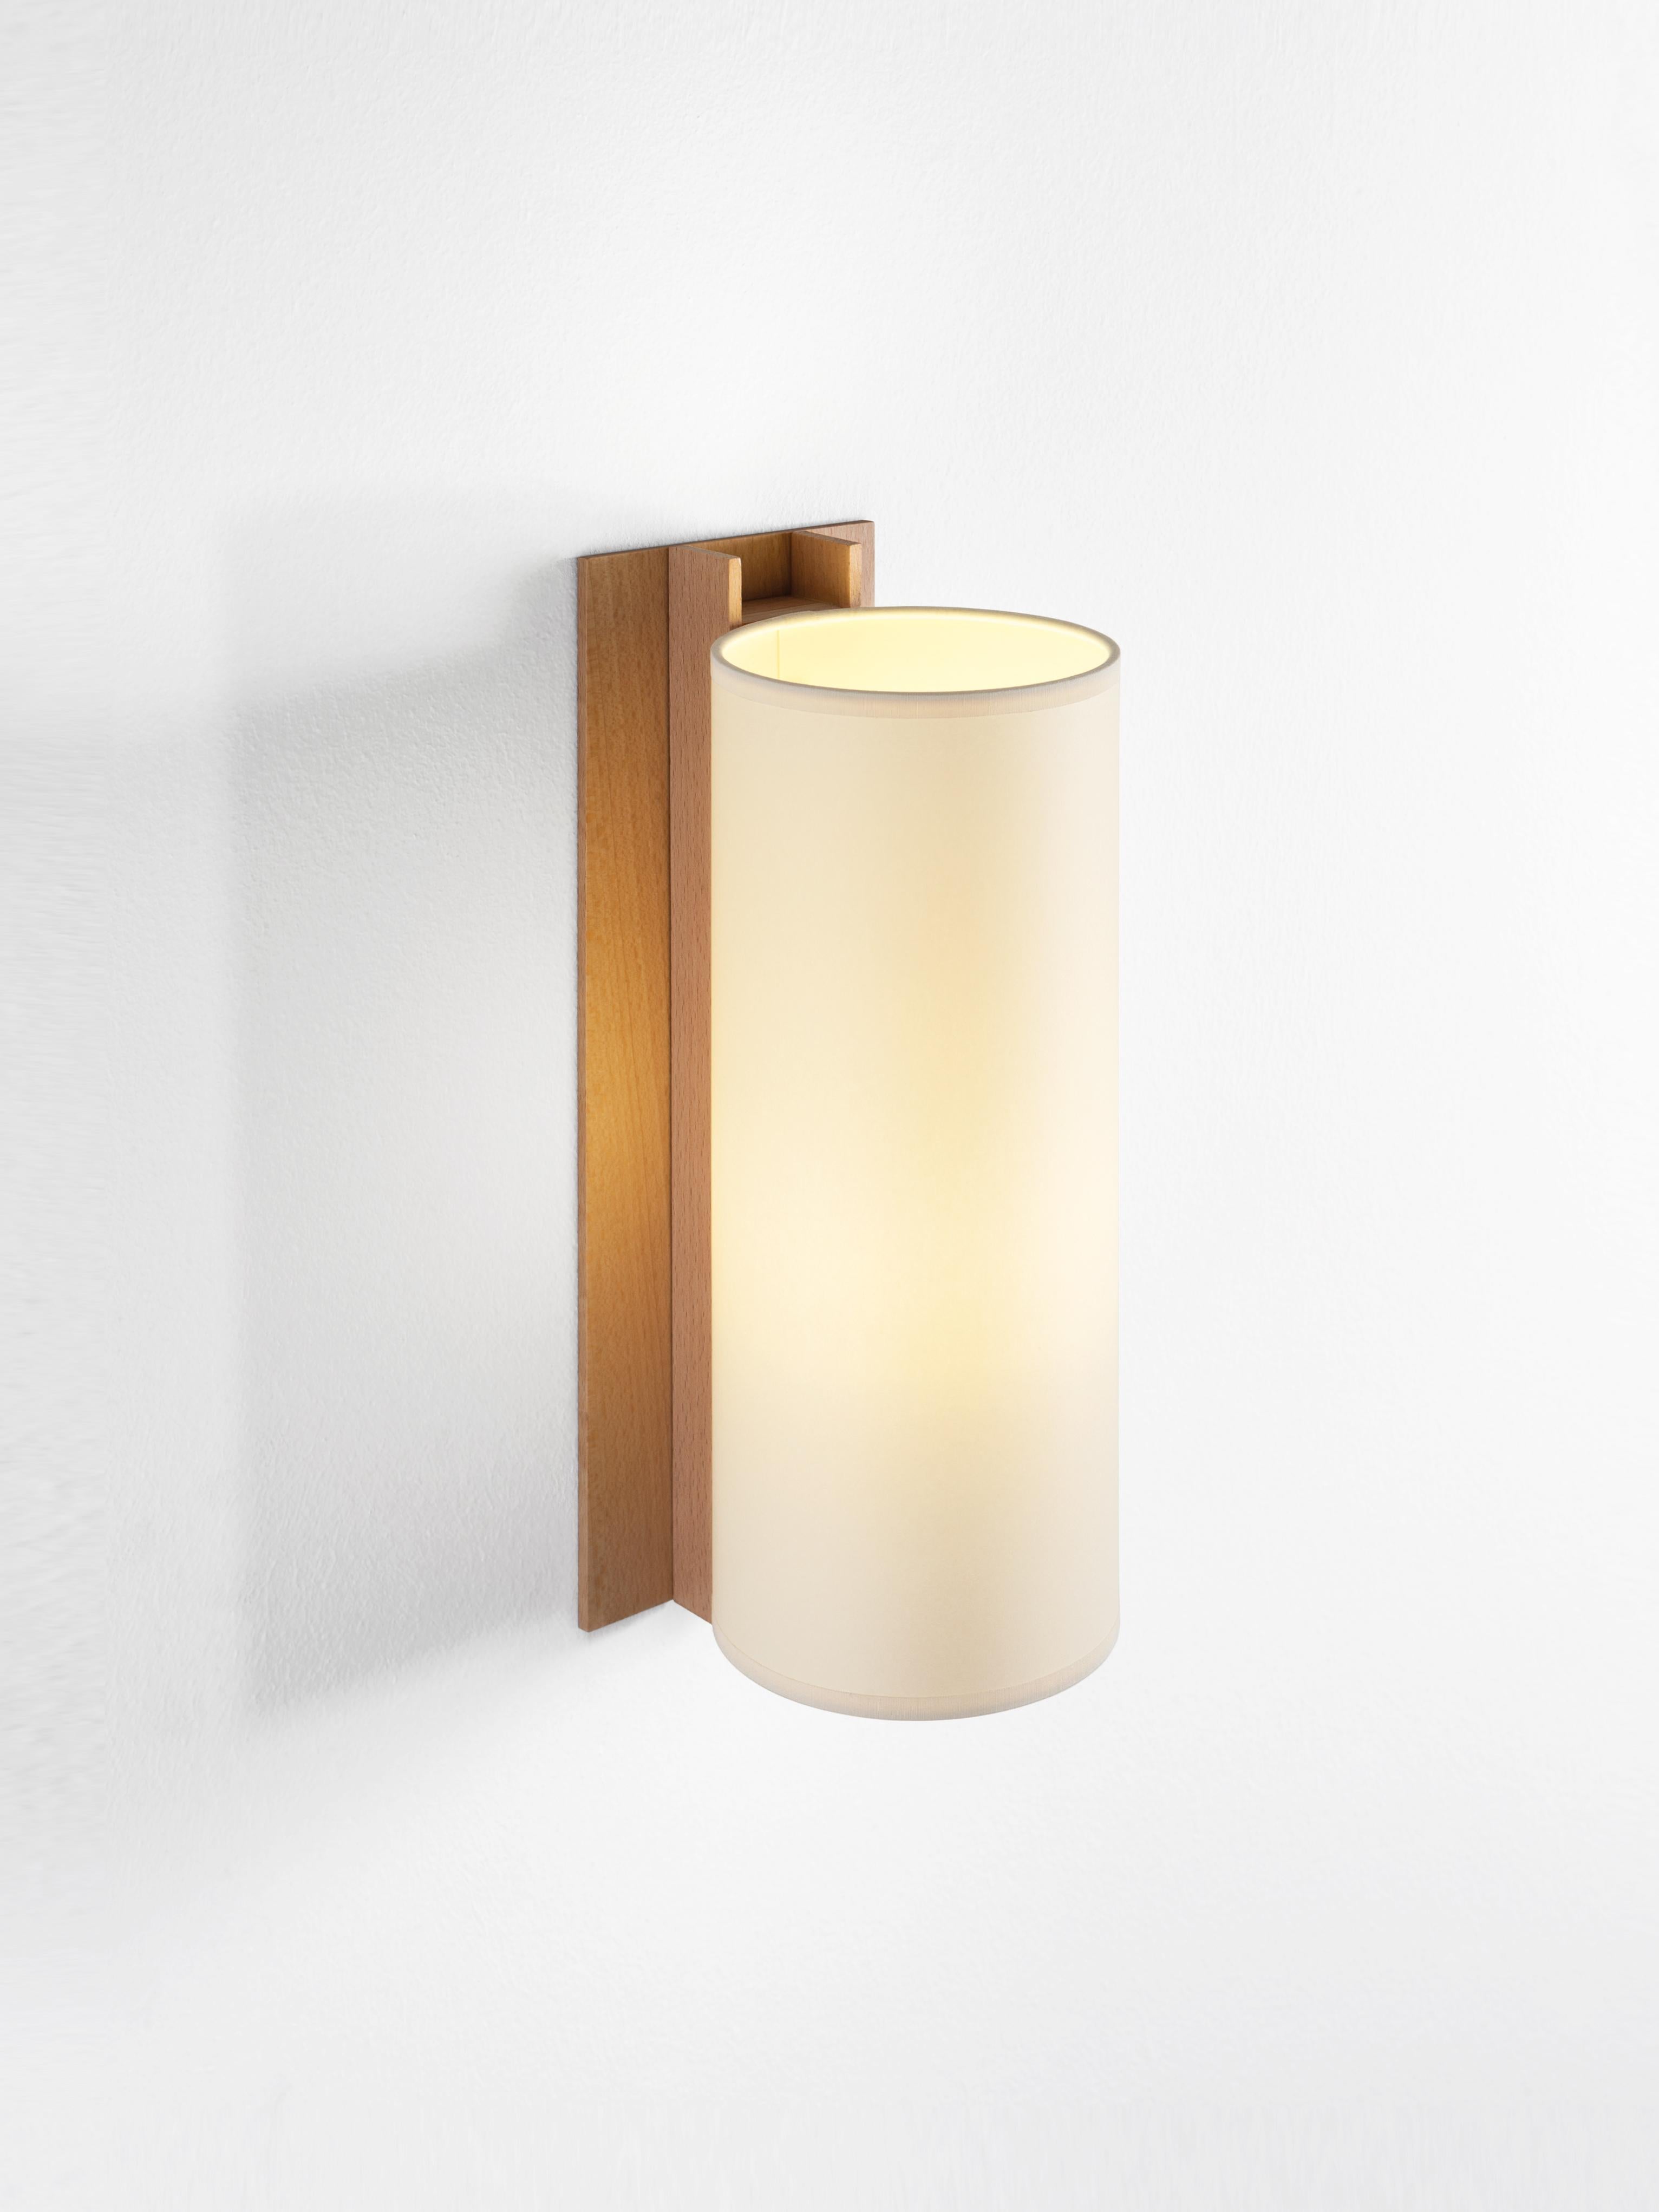 Beige and beech TMM largo wall lamp by Miguel Milá
Dimensions: D 12 x W 15 x H 34 cm
Materials: Metal, beech wood, parchment lampshade.
Available in beech or walnut and in white or beige lampshade.

The long and short wall lamps belonging to